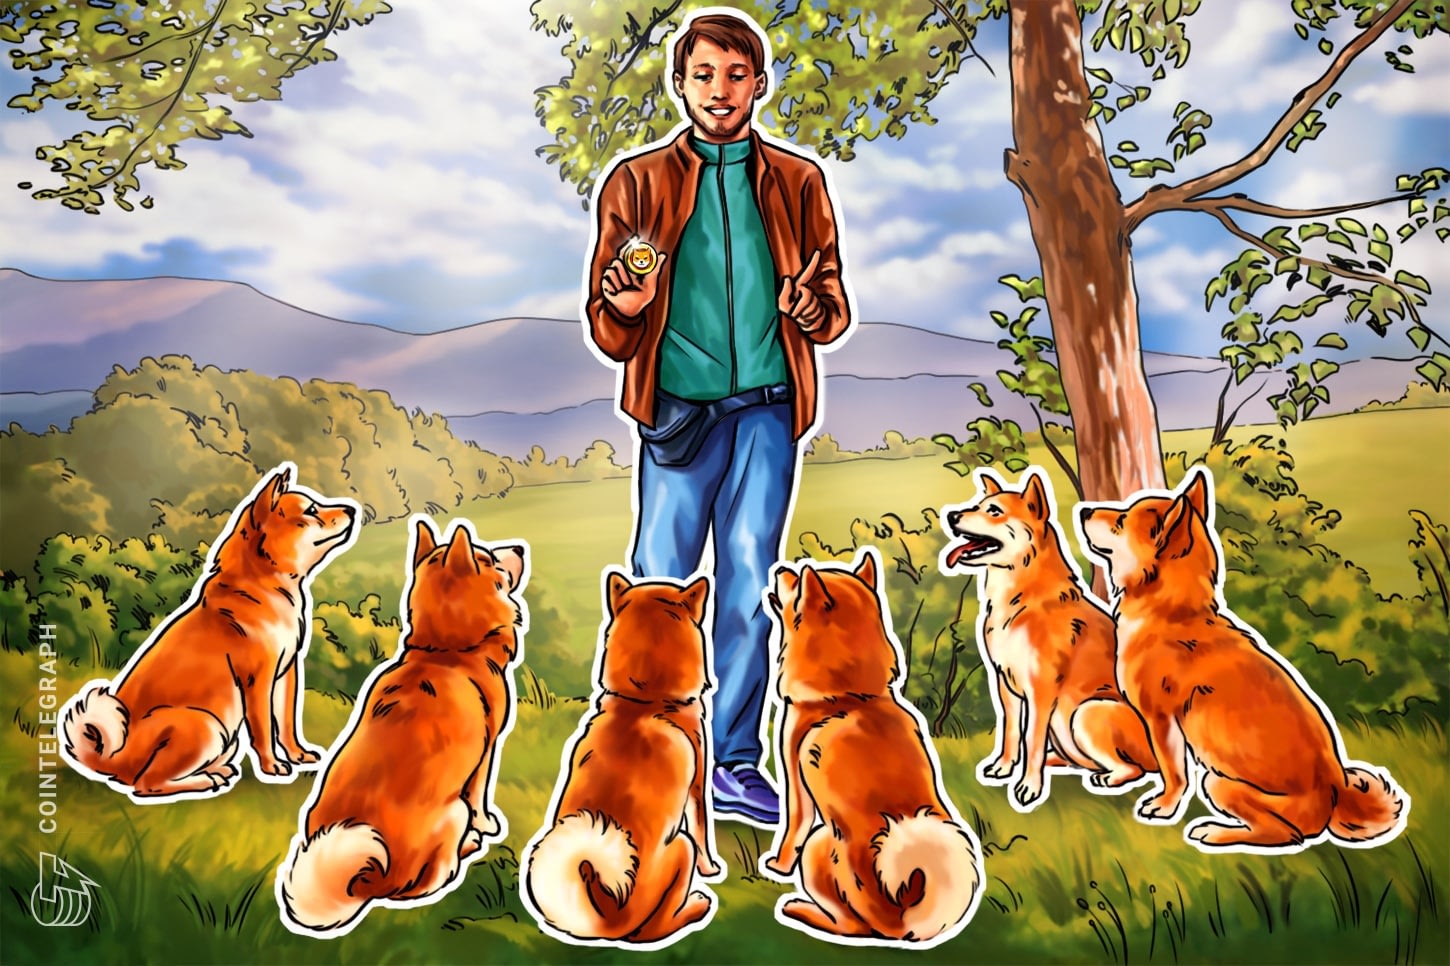 Shiba Inu developer says WEF wants to work with project to 'help shape' metaverse global policy